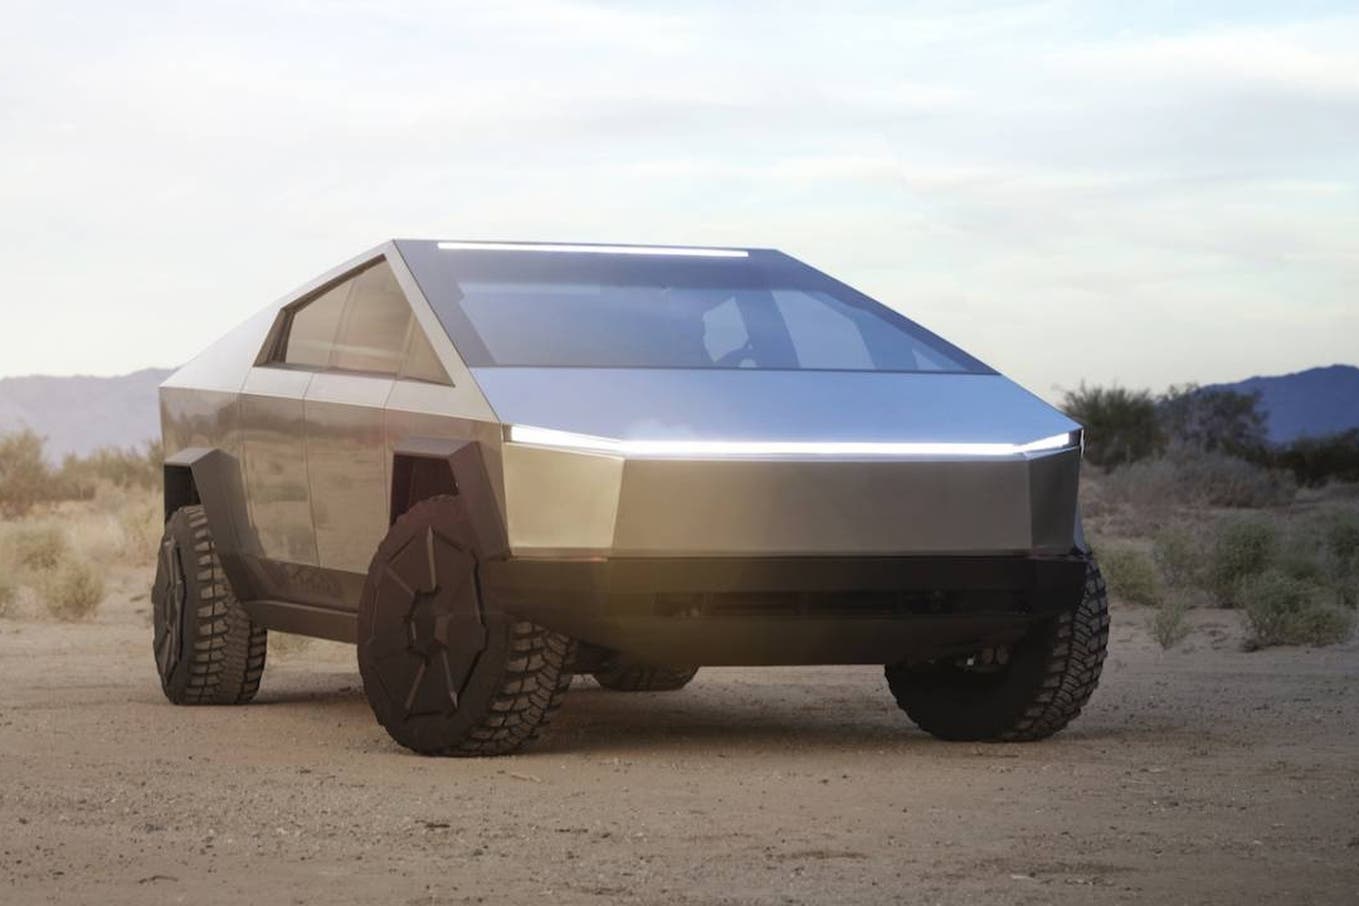 Cybertruck: this is Tesla's unusual armored electric truck